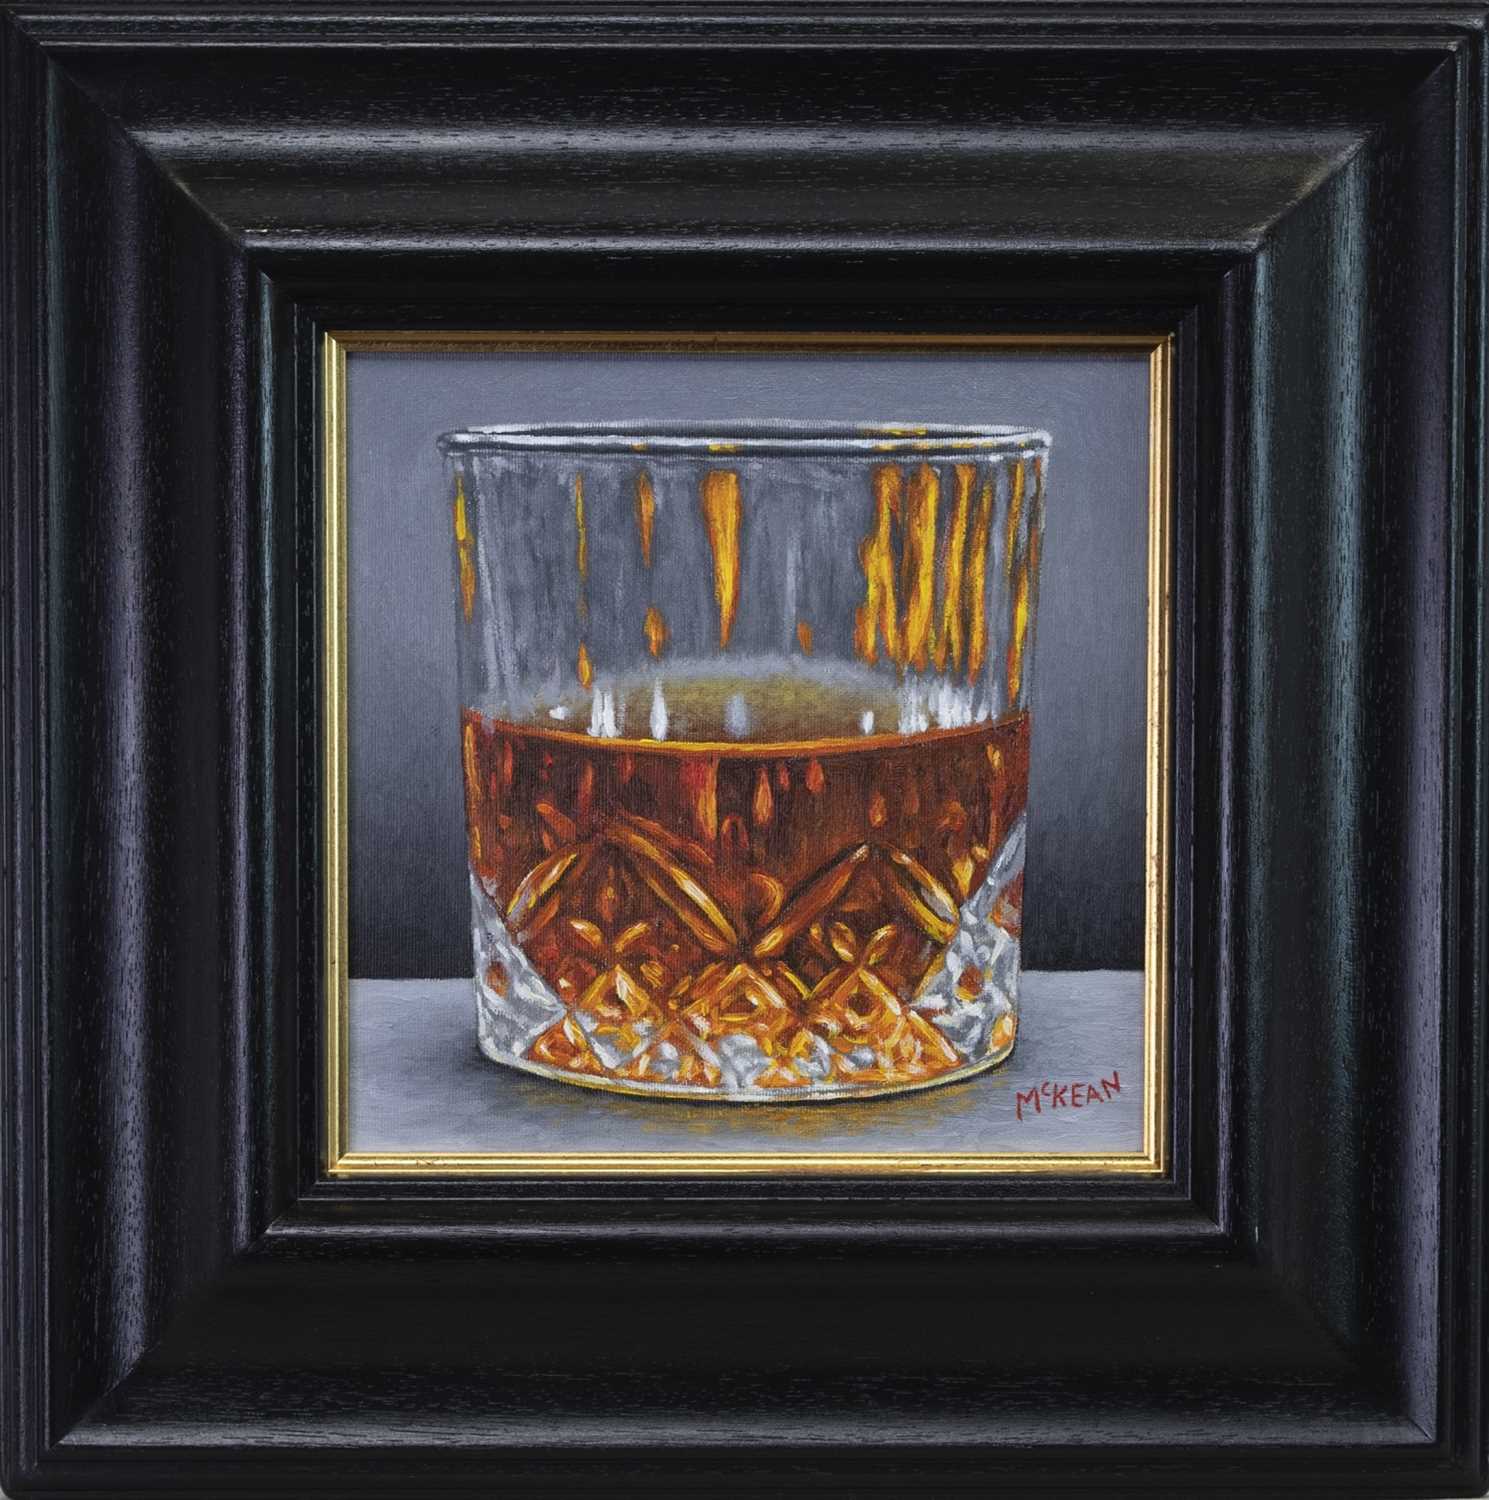 Lot 583 - SCOTTISH FIRE WATER STUDY, AN OIL BY GRAHAM MCKEAN